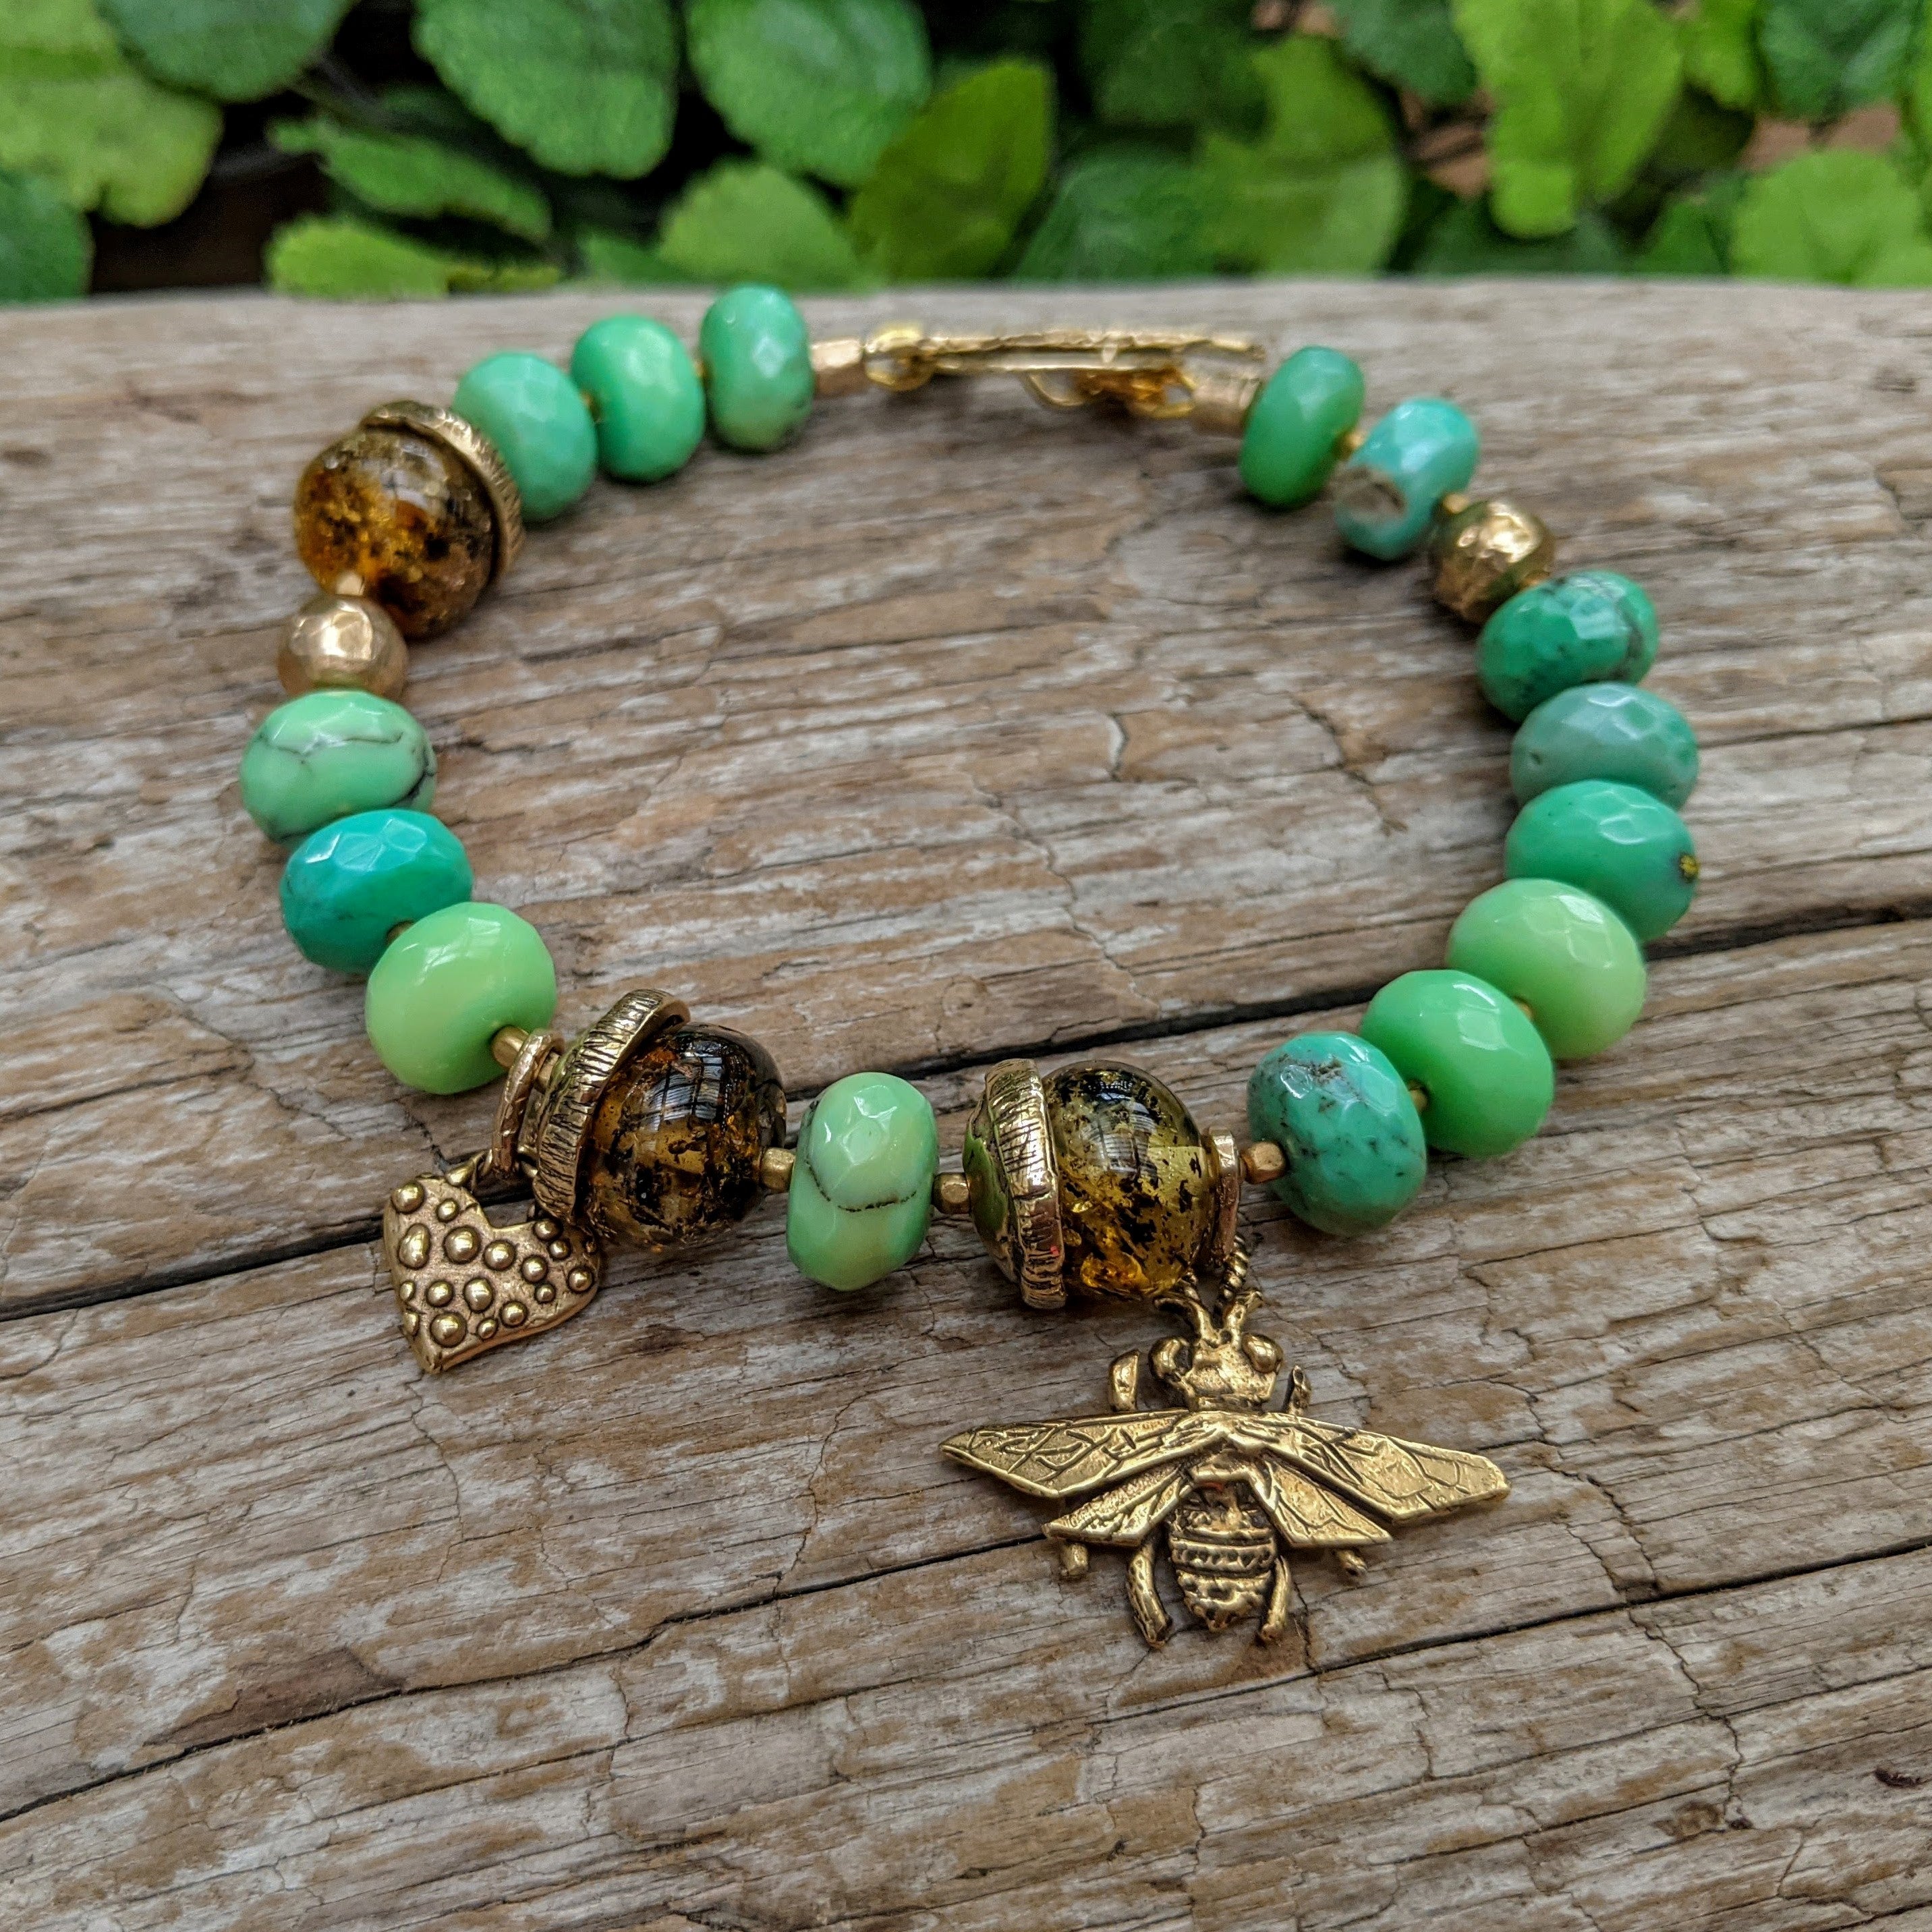 Lime green chrysoprase bracelet with Baltic amber. Bee charm bracelet. Forest green chrysoprase gemstone bracelet. Artisan bracelet. Artistic bracelet. Handcrafted by Aurora Creative Jewellery.